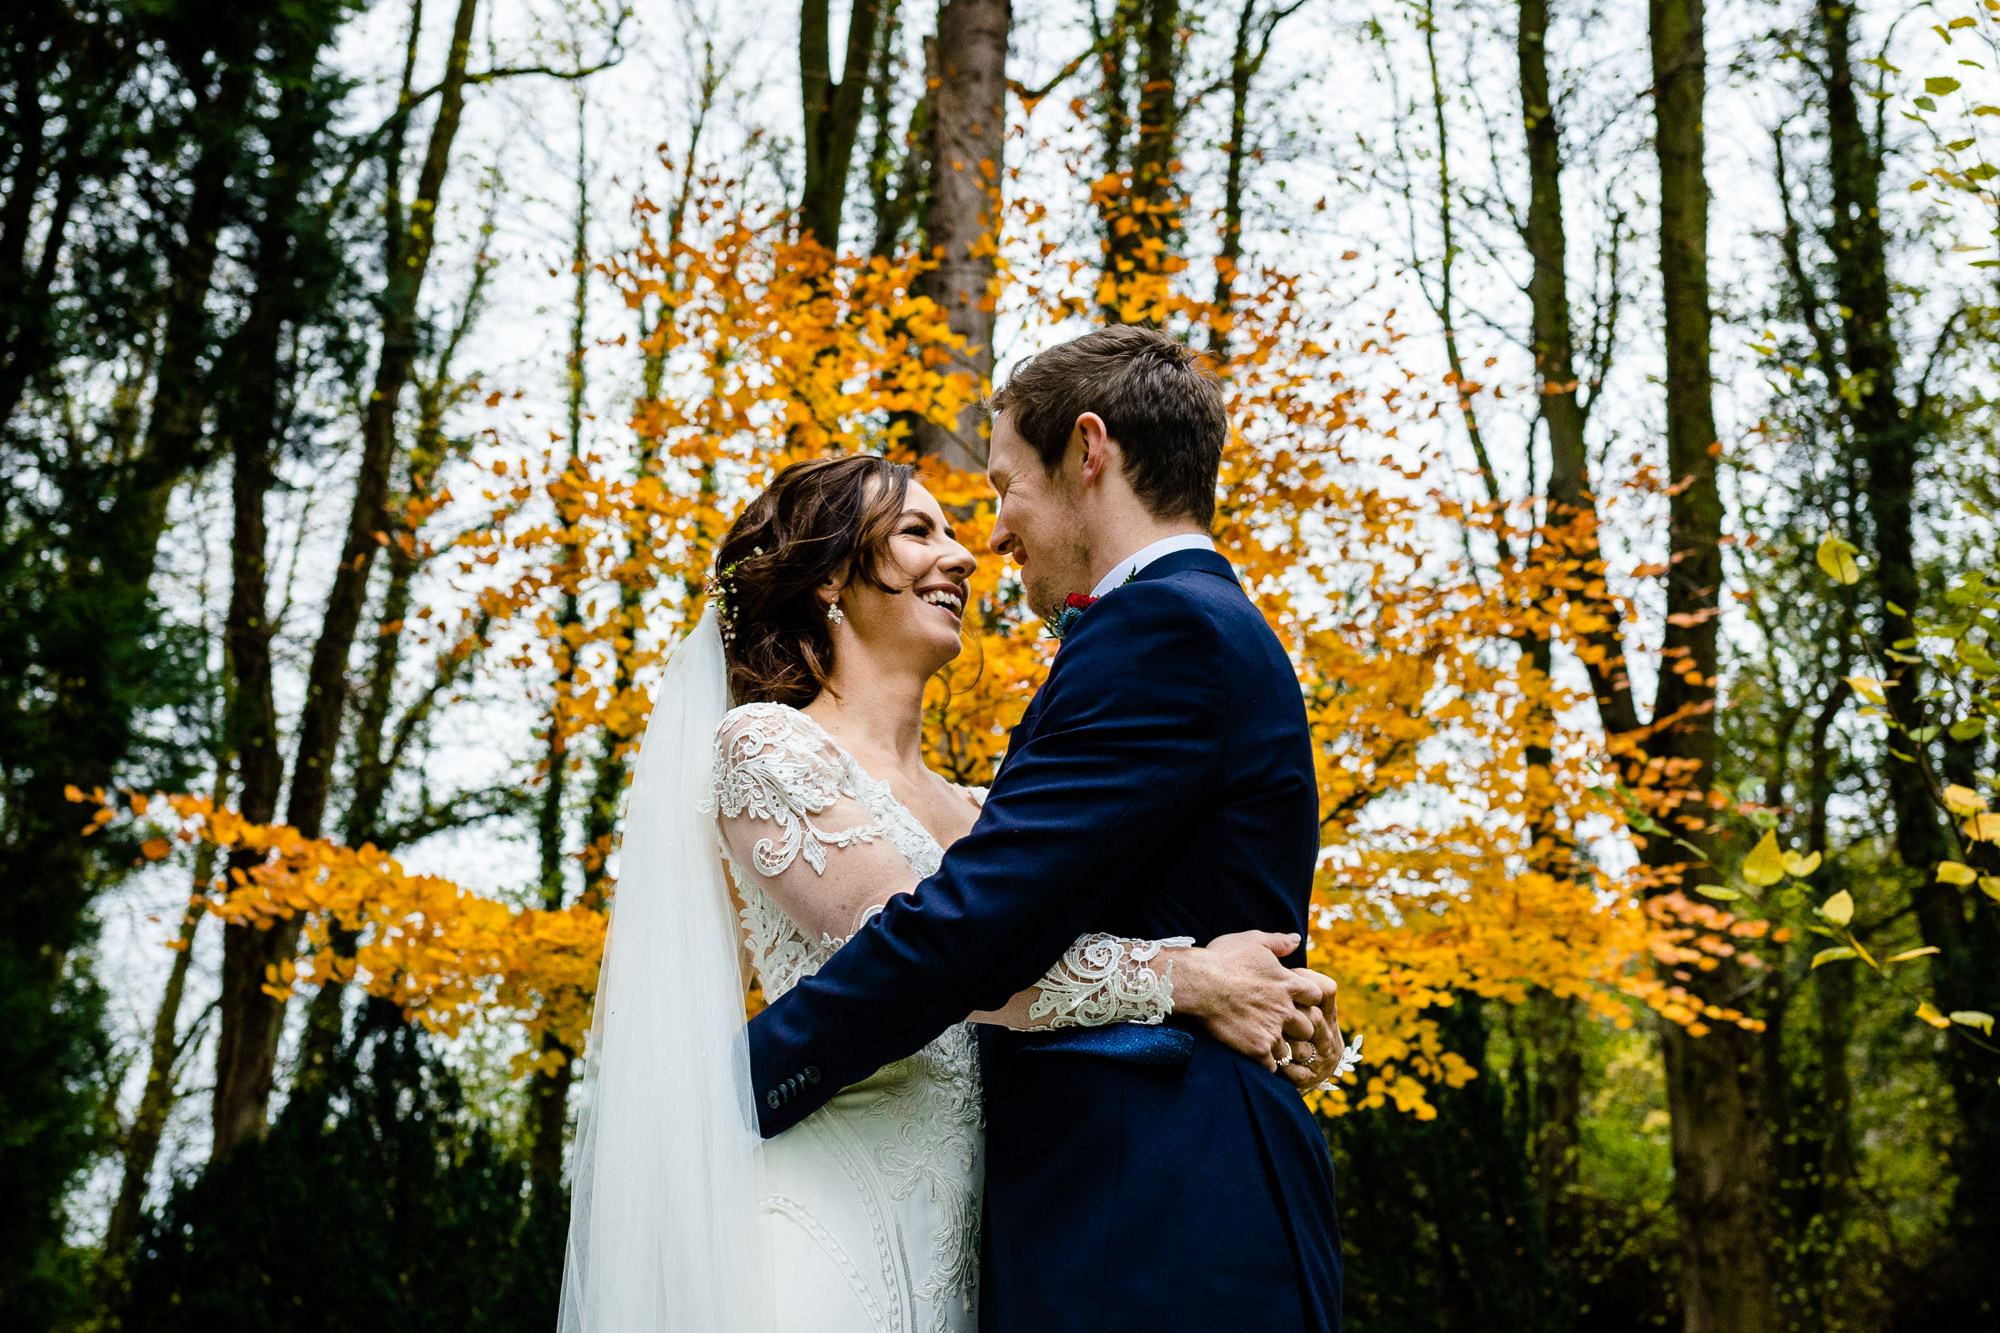 Bride and groom with a colourful autumn backdrop in the forest grounds of Tyn Dwr Hall, by wedding photographers Zoe &amp; Tom